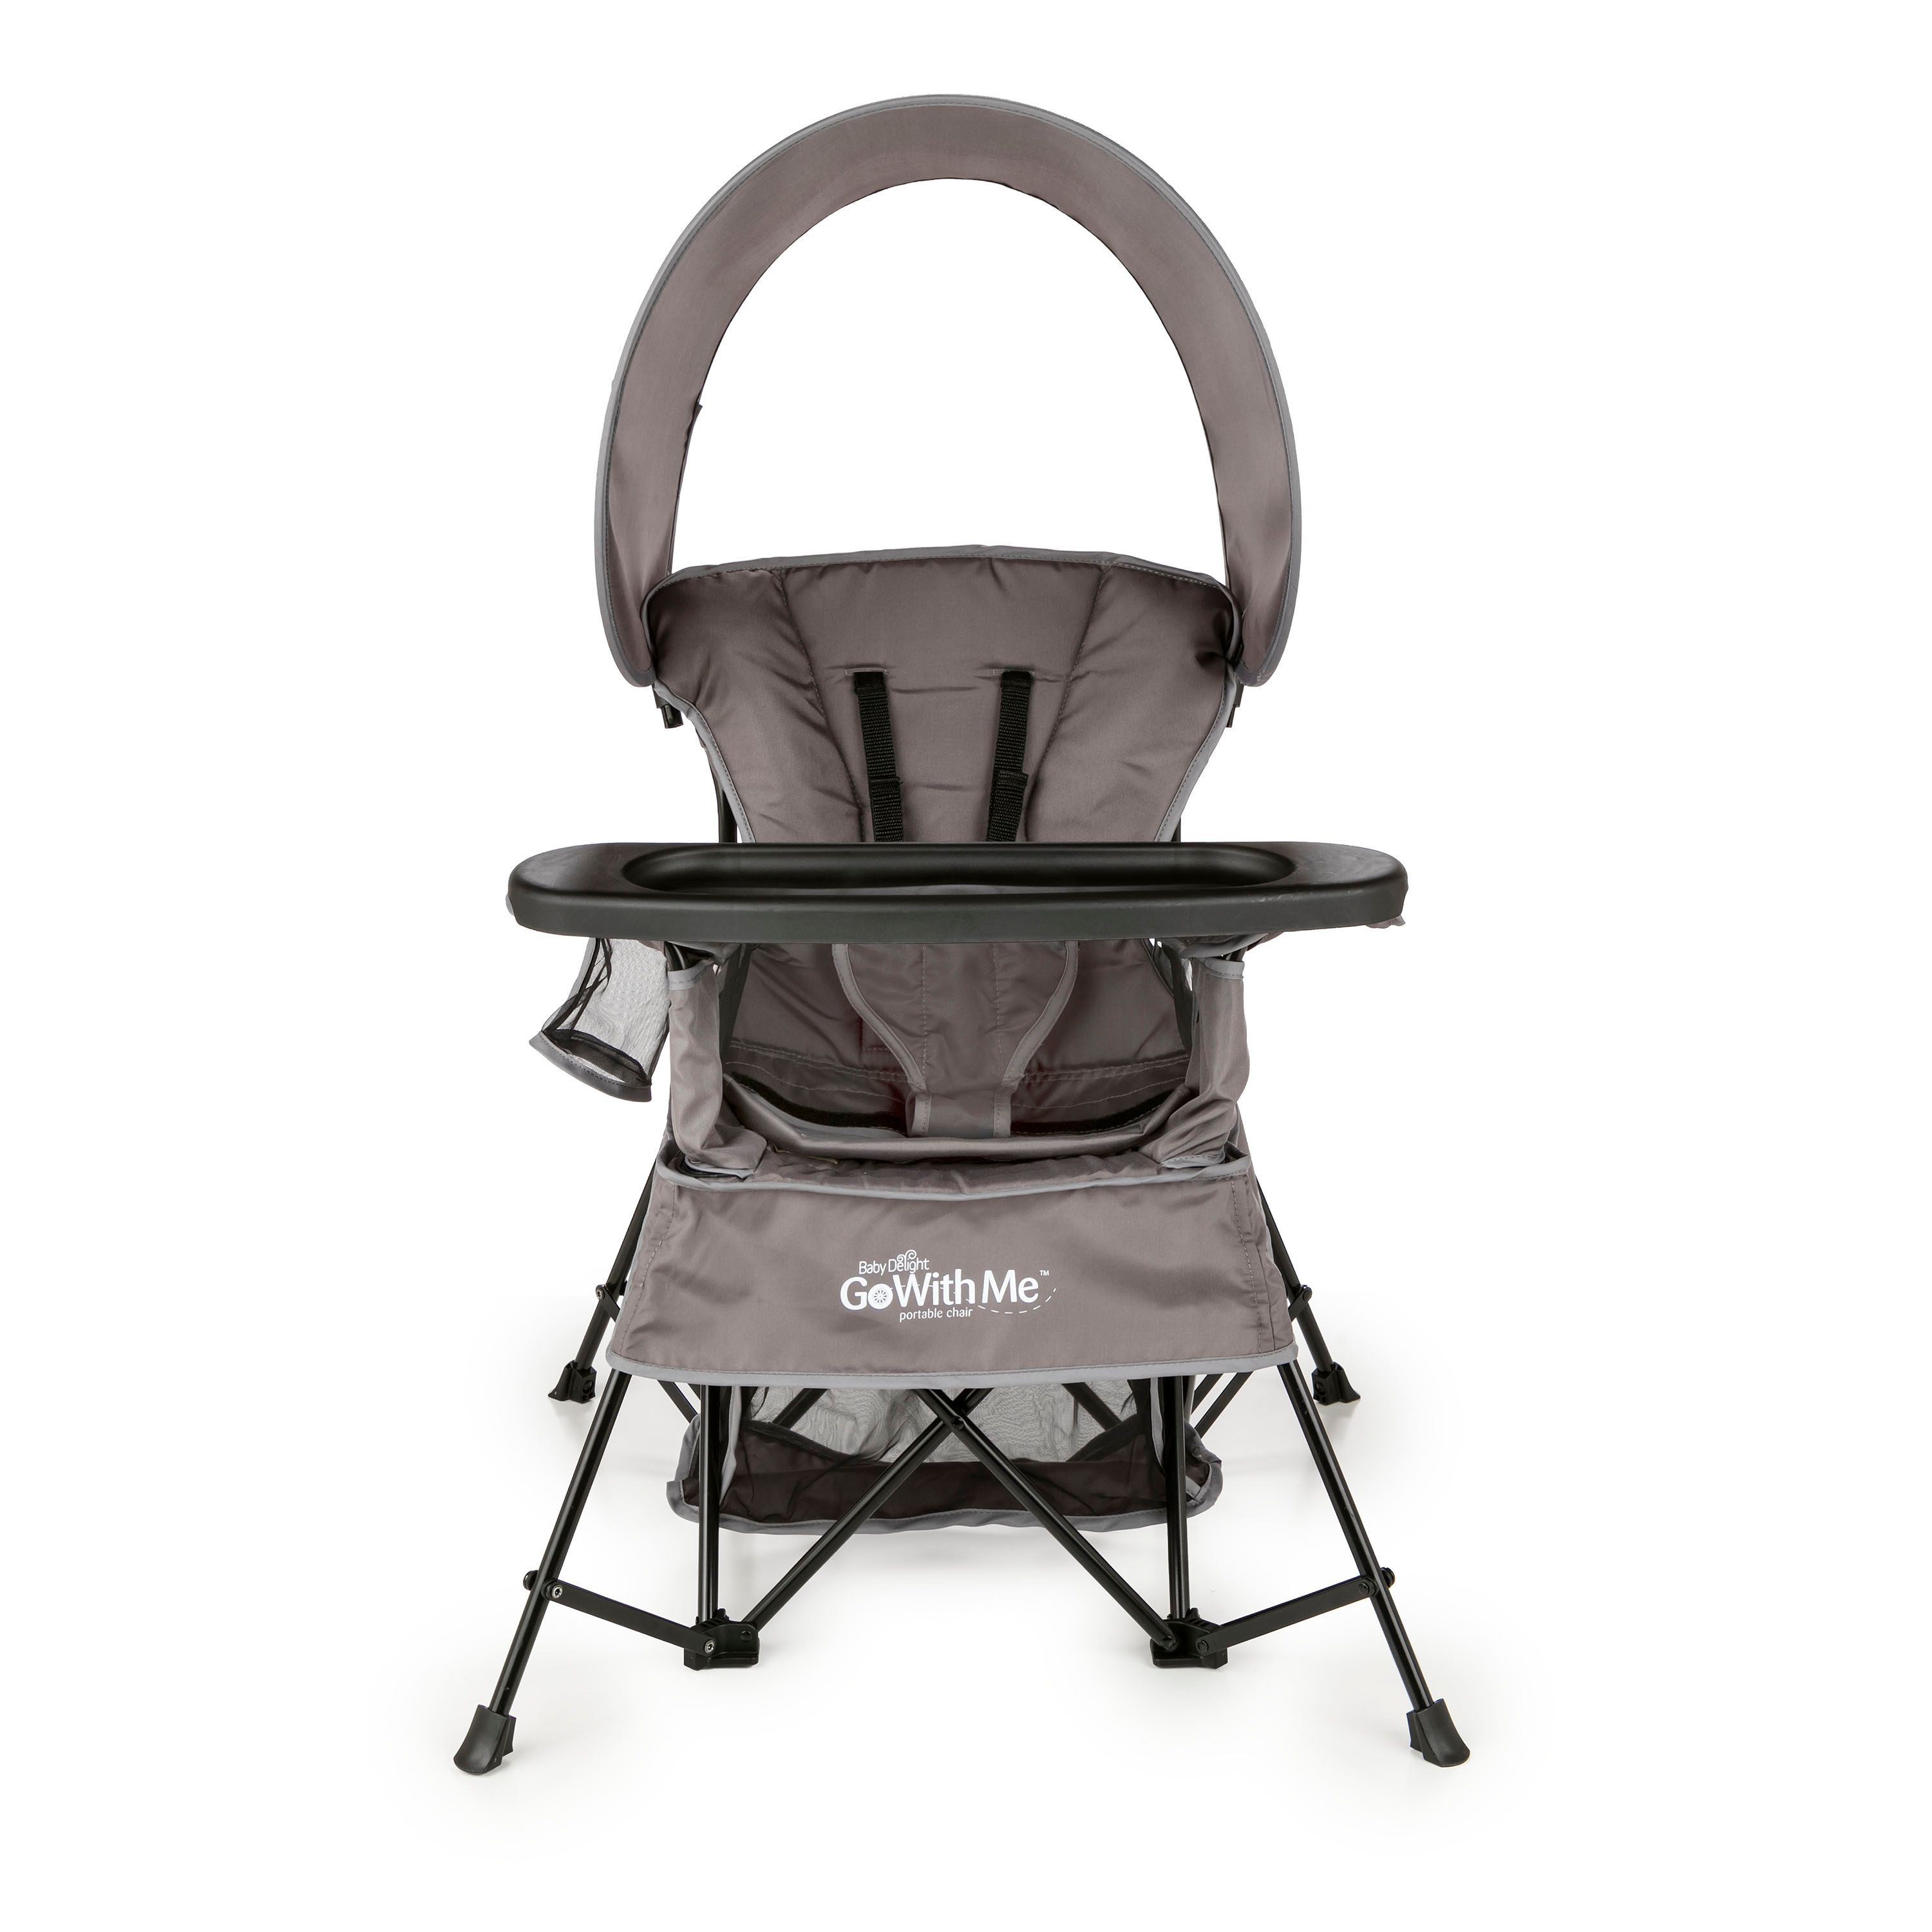 Baby Delight Go With Me Venture Deluxe Portable Chair for Kids - Grey